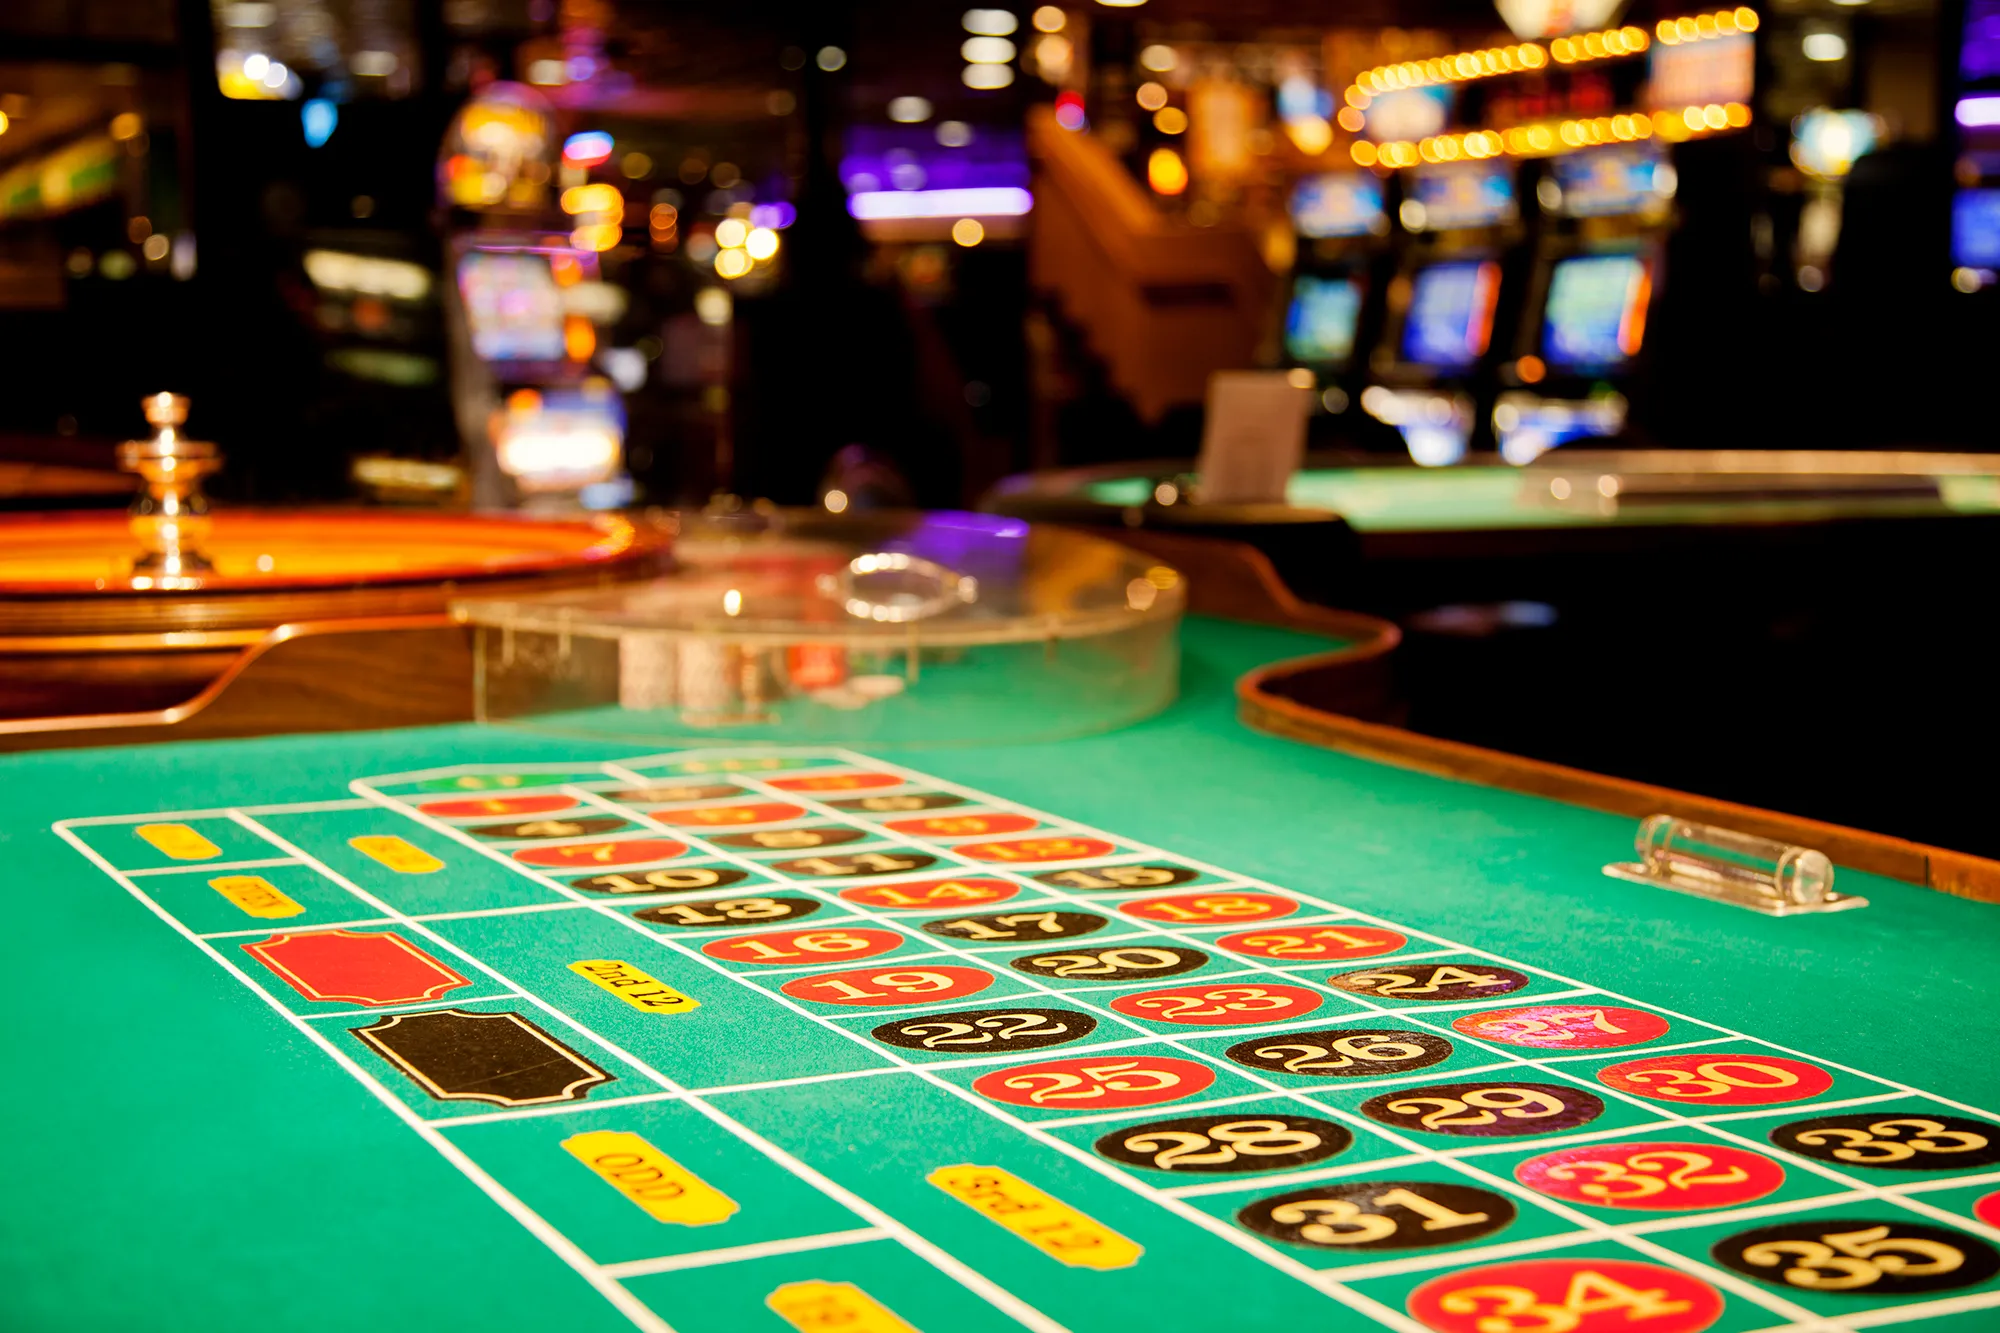 Technological Innovations in Casinos: From Slot Machines to Online Betting